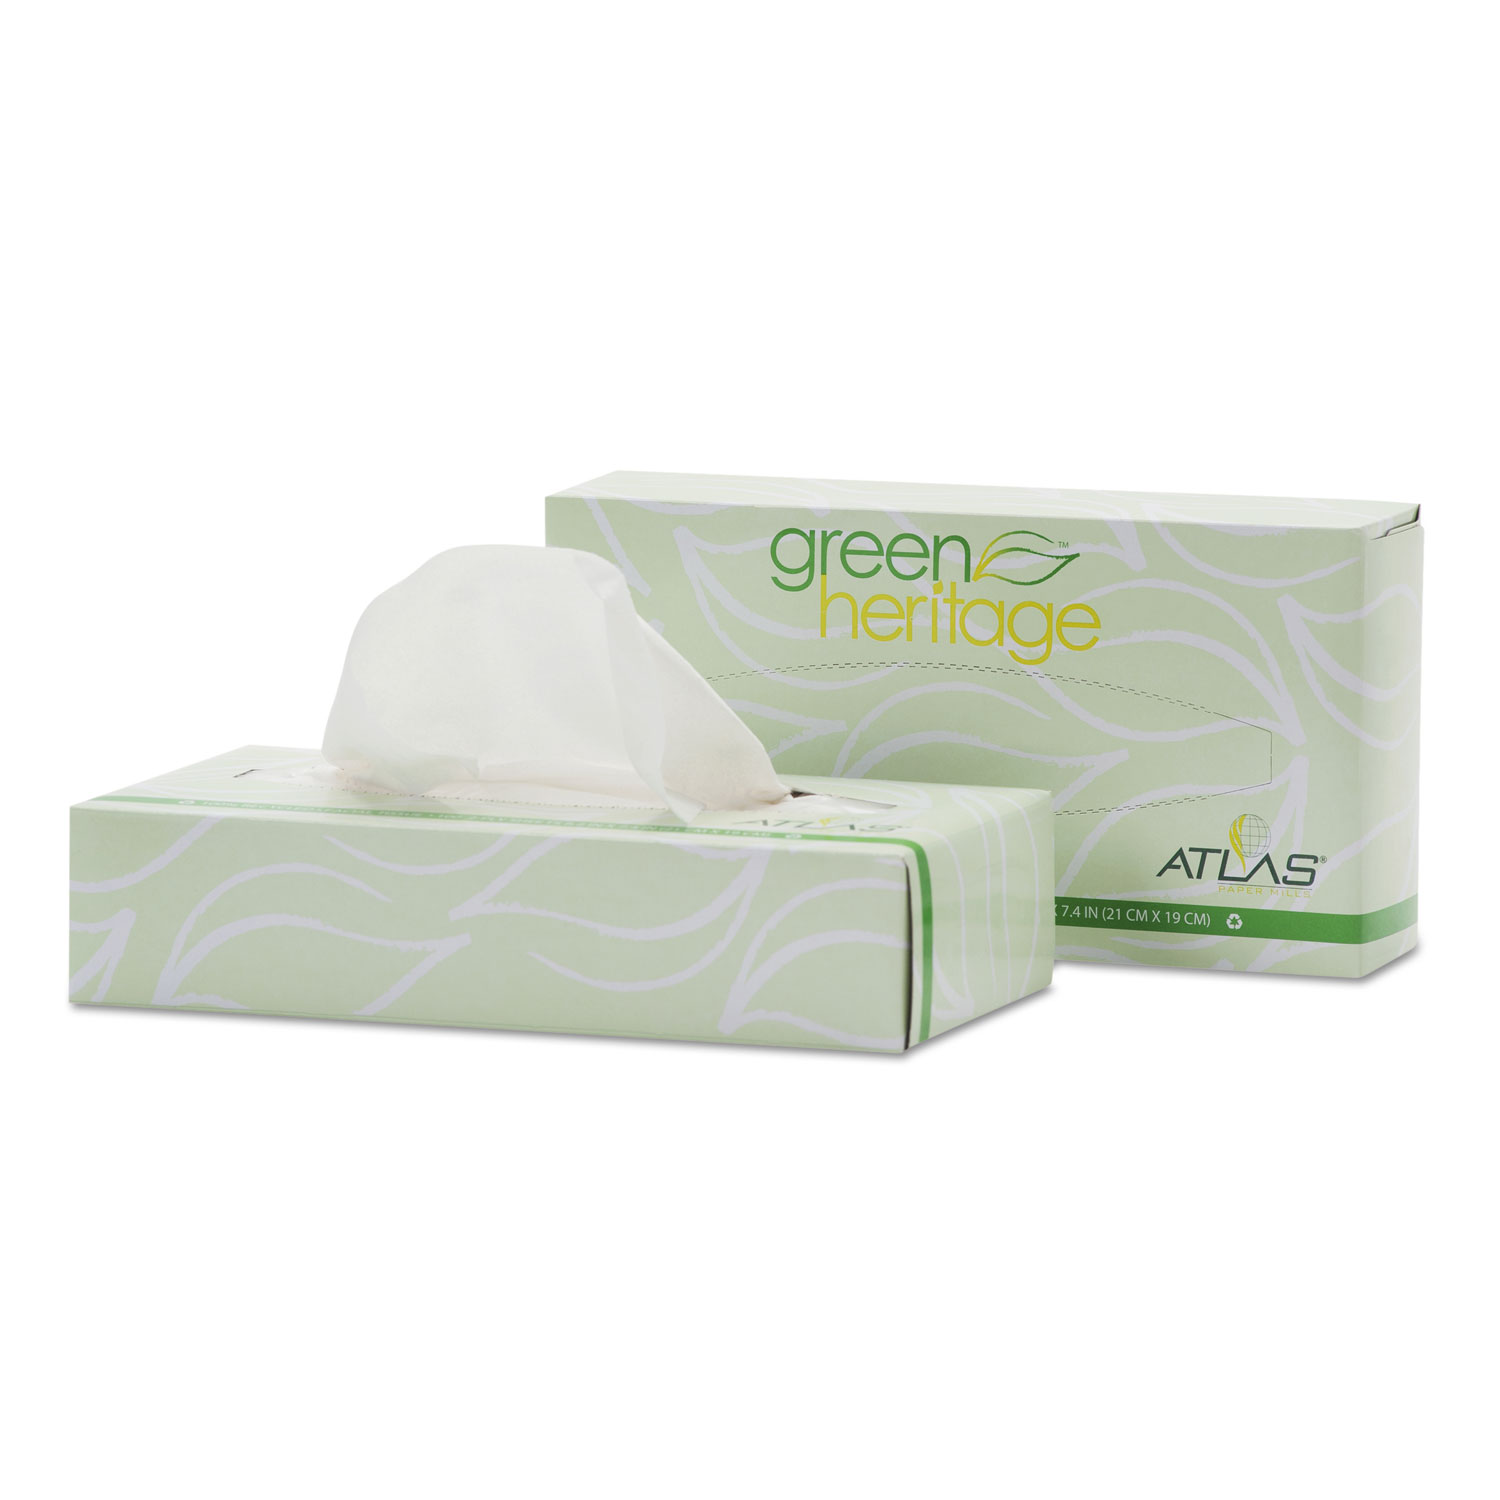  Resolute Tissue 324330 Green Heritage Professional Facial Tissue, 2-Ply, White, 100 Sheets/Box, 30 Boses/Carton (APM324330) 